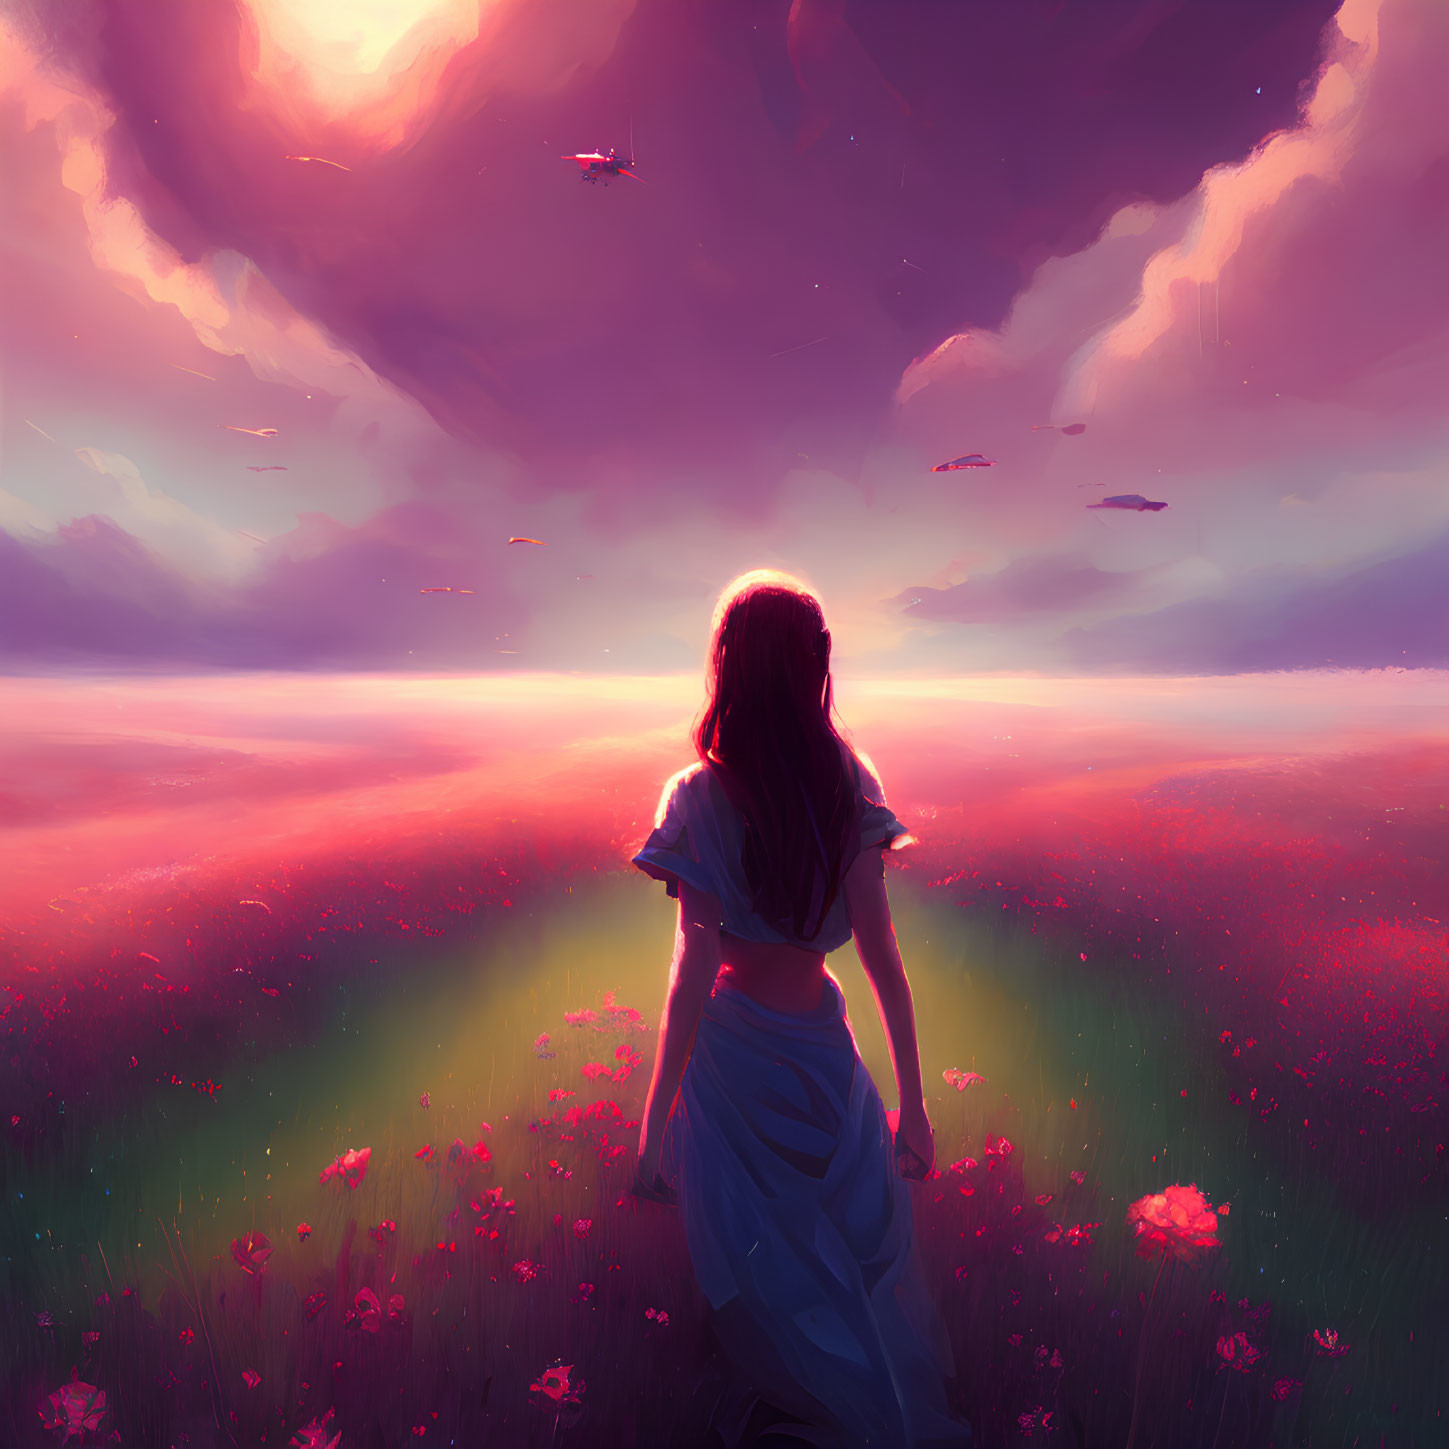 Person in flower field at sunset with pink and purple skies